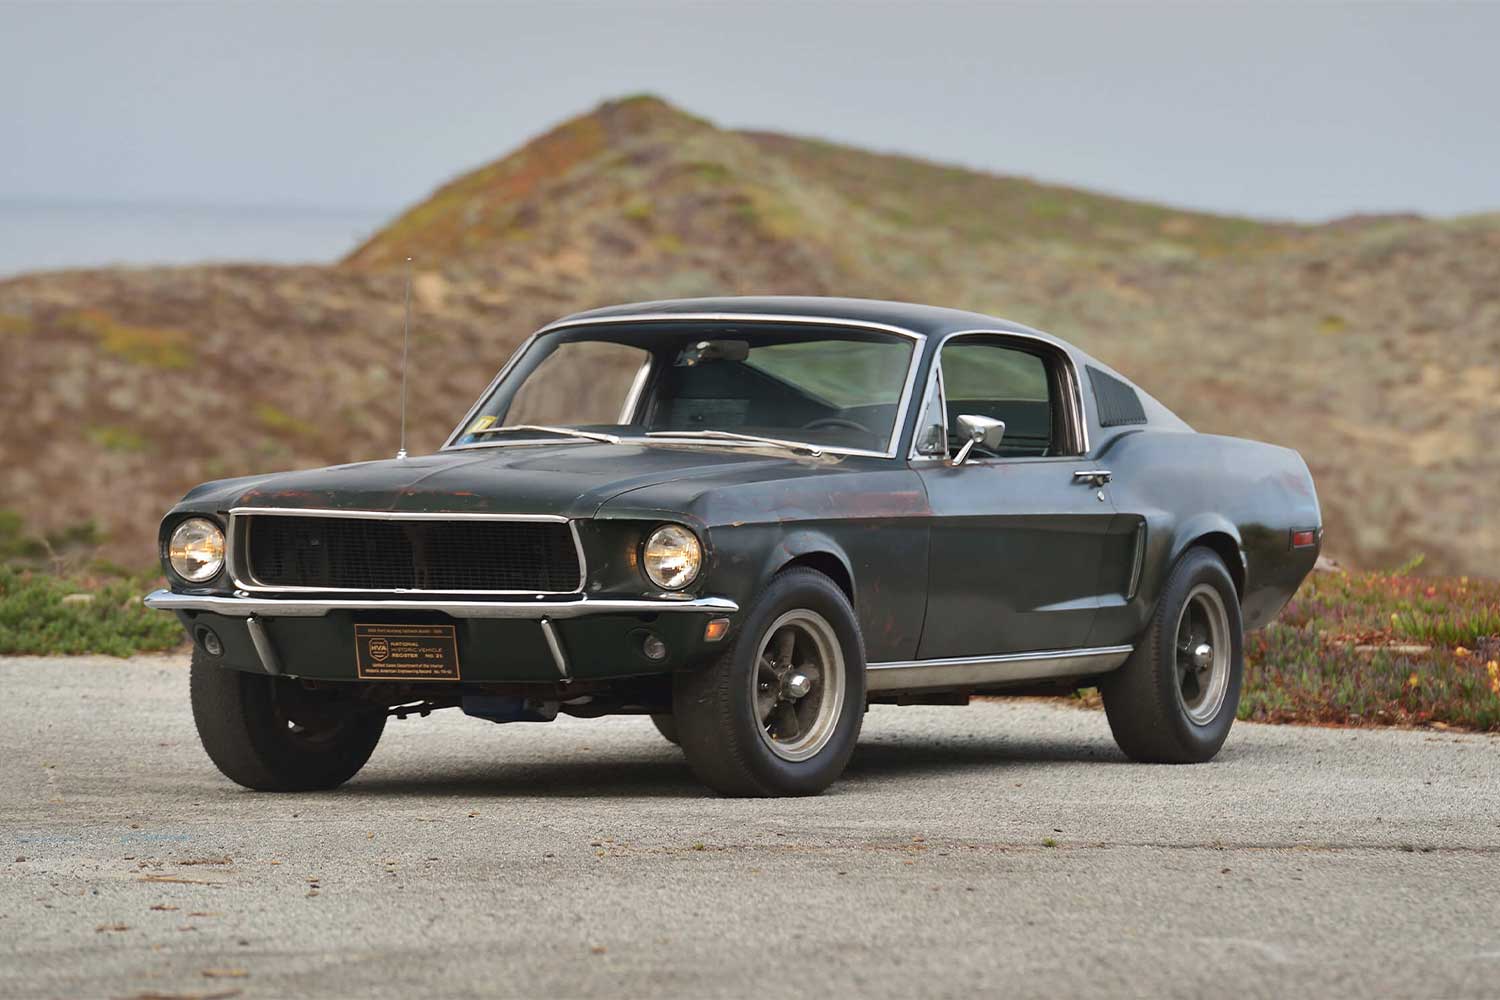 The McQueen Bullitt Mustang GT 390 Fastback was sold for $3,740,000 at Mecum Kissimmee 2020 and became the most valuable Ford Mustang in the world (Image: bullitt.mecum.com)